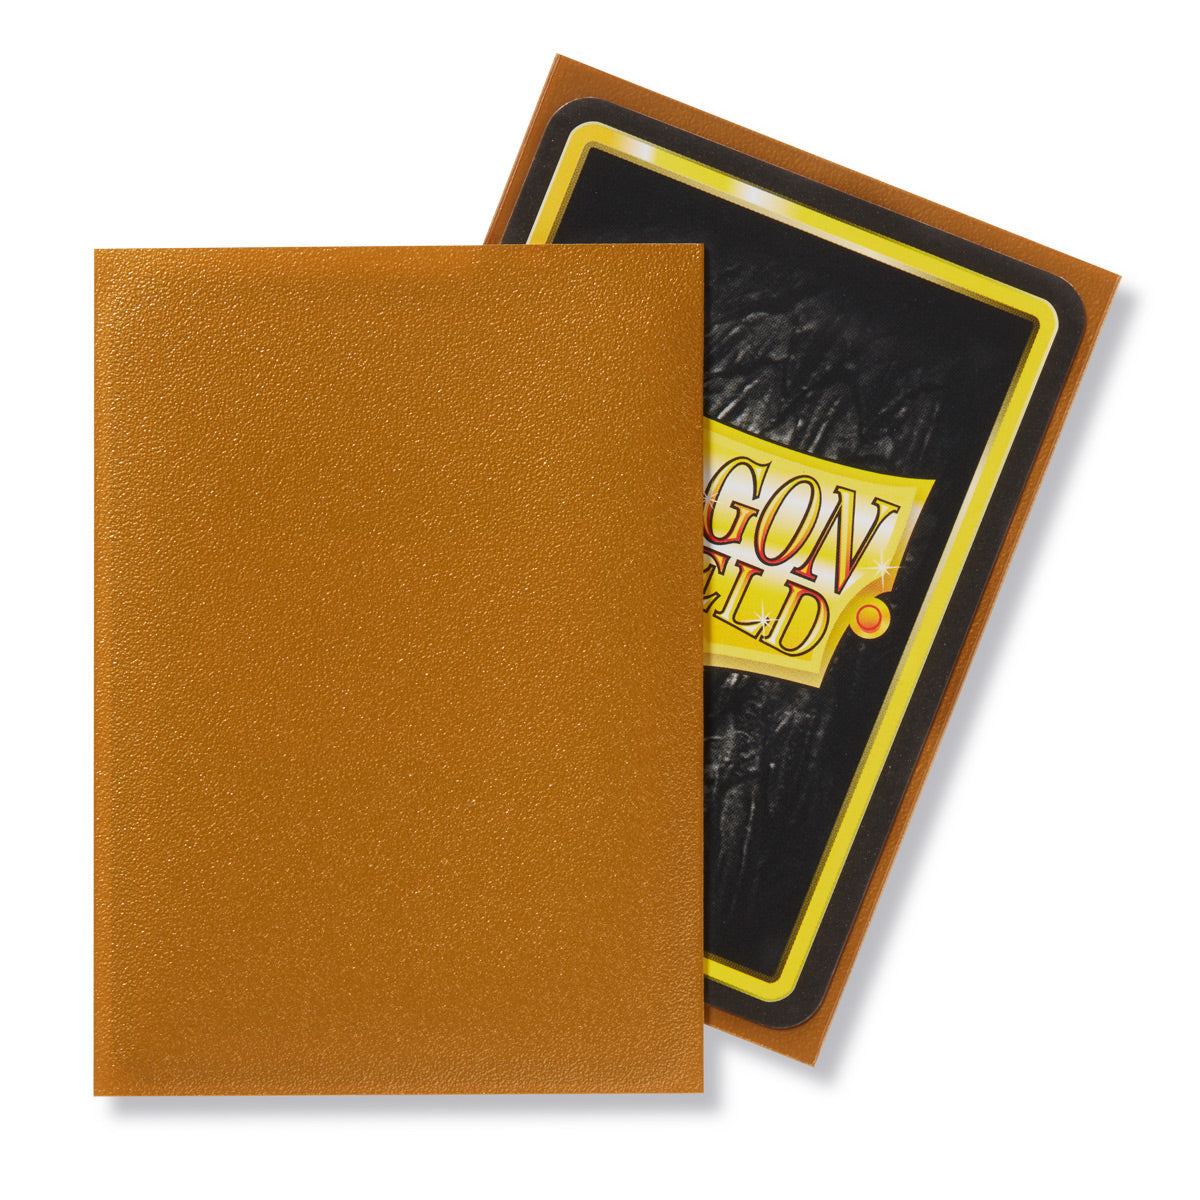 Dragon Shield: Matte Gold (100) Protective Sleeves